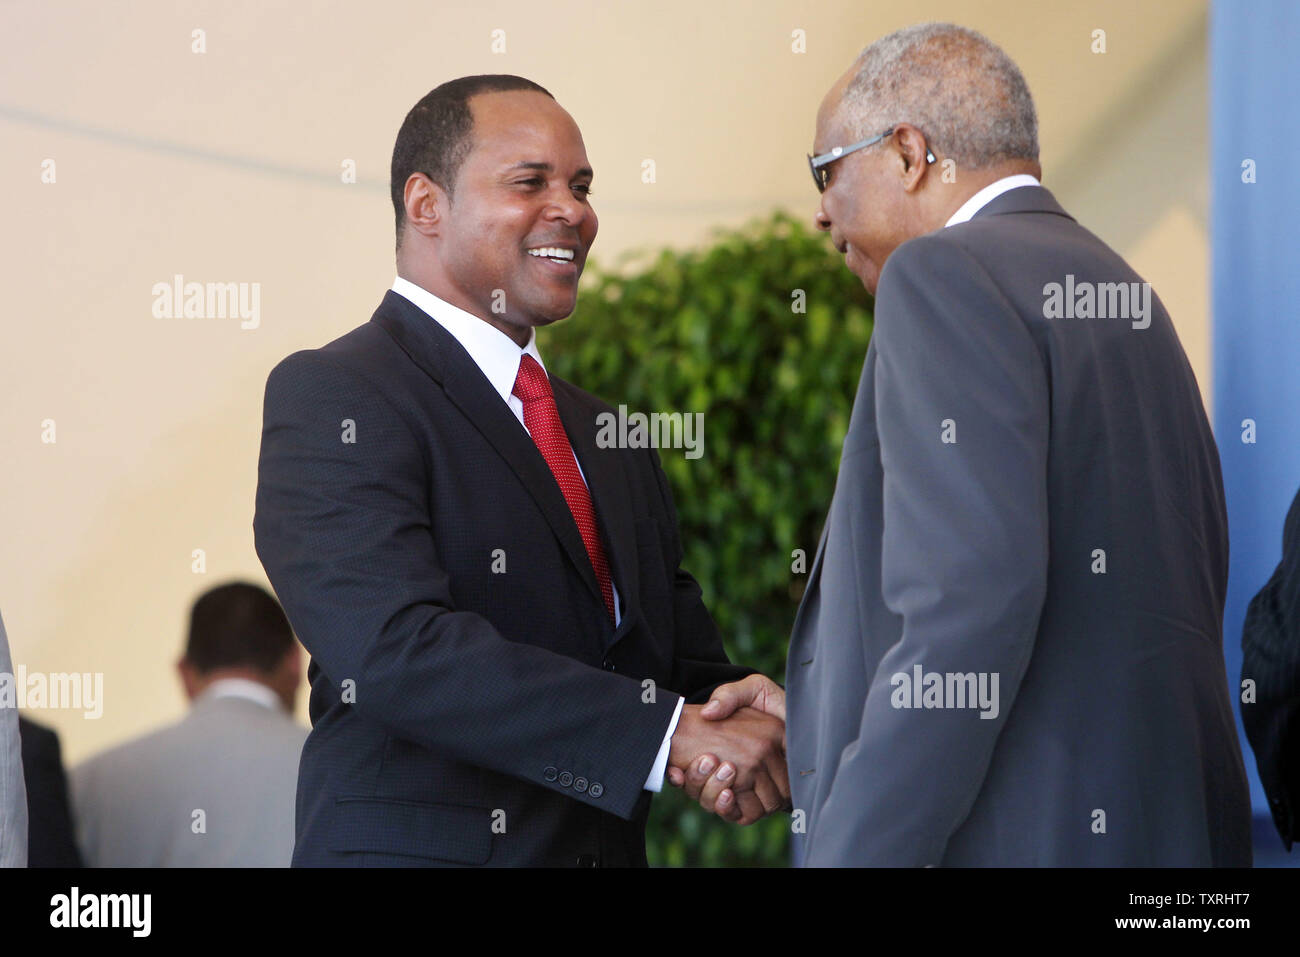 National Baseball Hall of Fame's newest member Barry Larkin (L) is congratulated by fellow member Frank Robinson after induction ceremonies in Cooperstown, New York on July 22, 2012. UPI/Bill Greenblatt Stock Photo